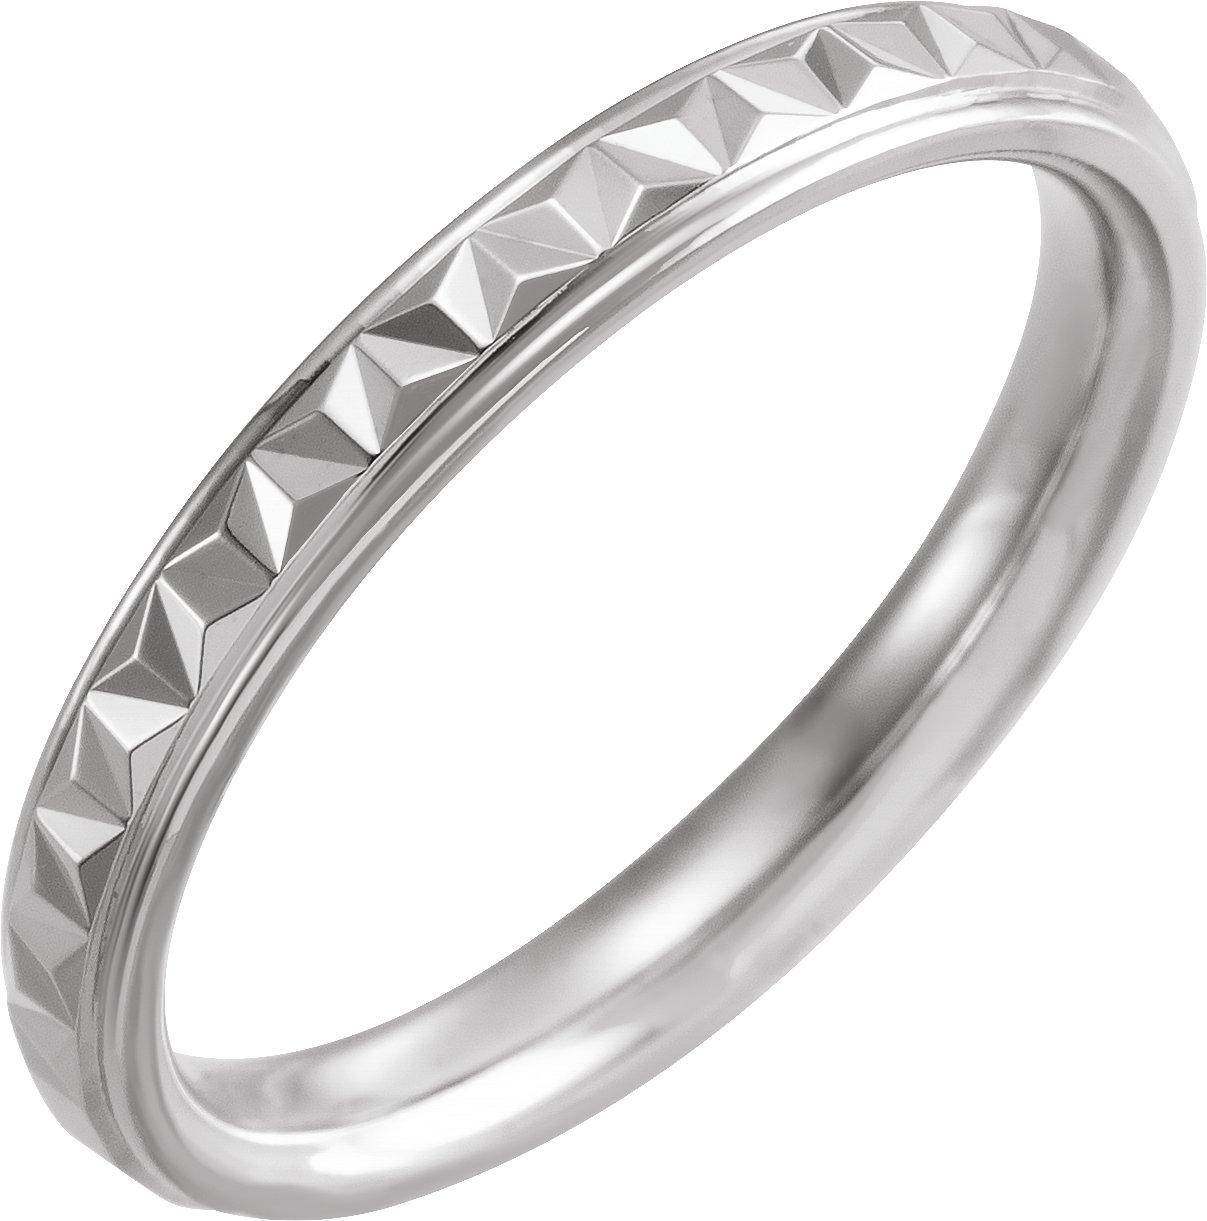 Continuum Sterling Silver 3 mm Geometric Band with Polished Finish Size 9.5